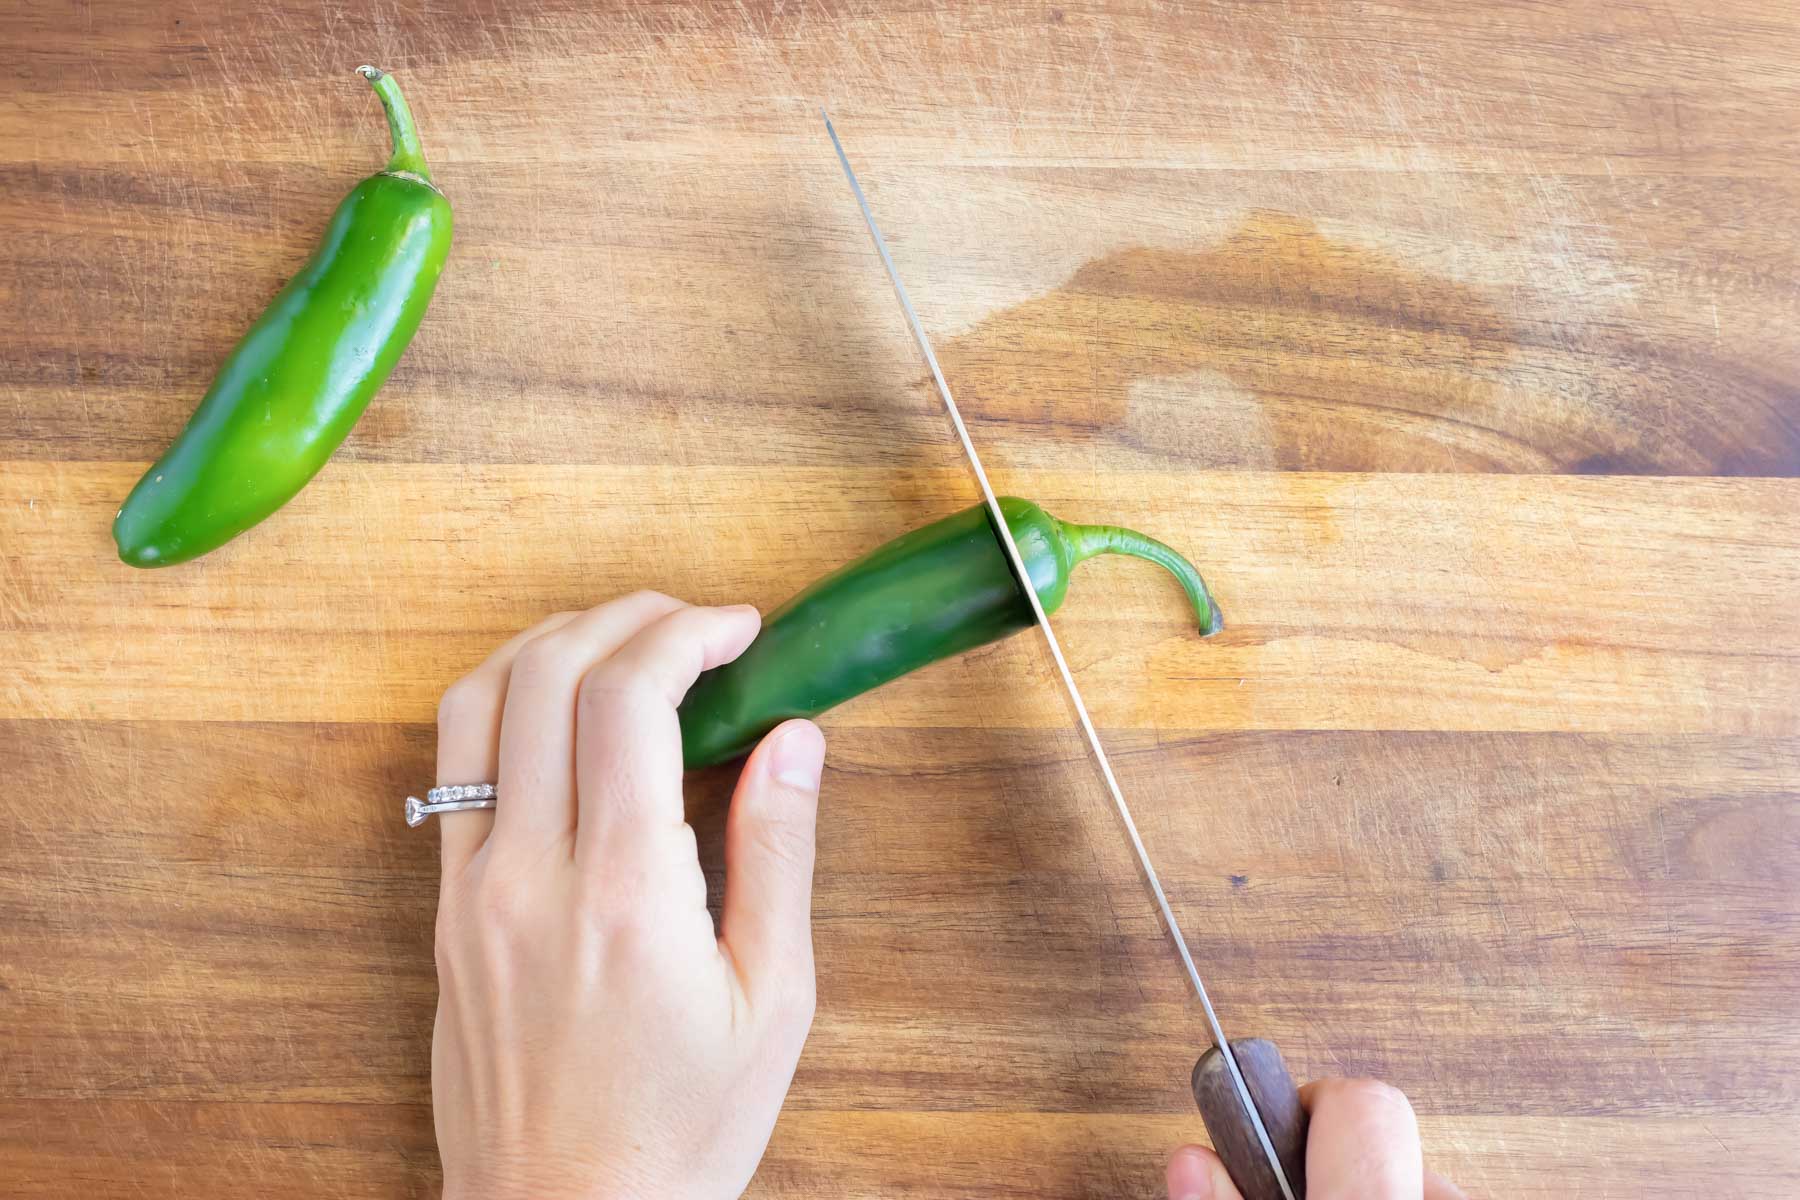 The top of a jalapeno pepper is chopped off with a knife.